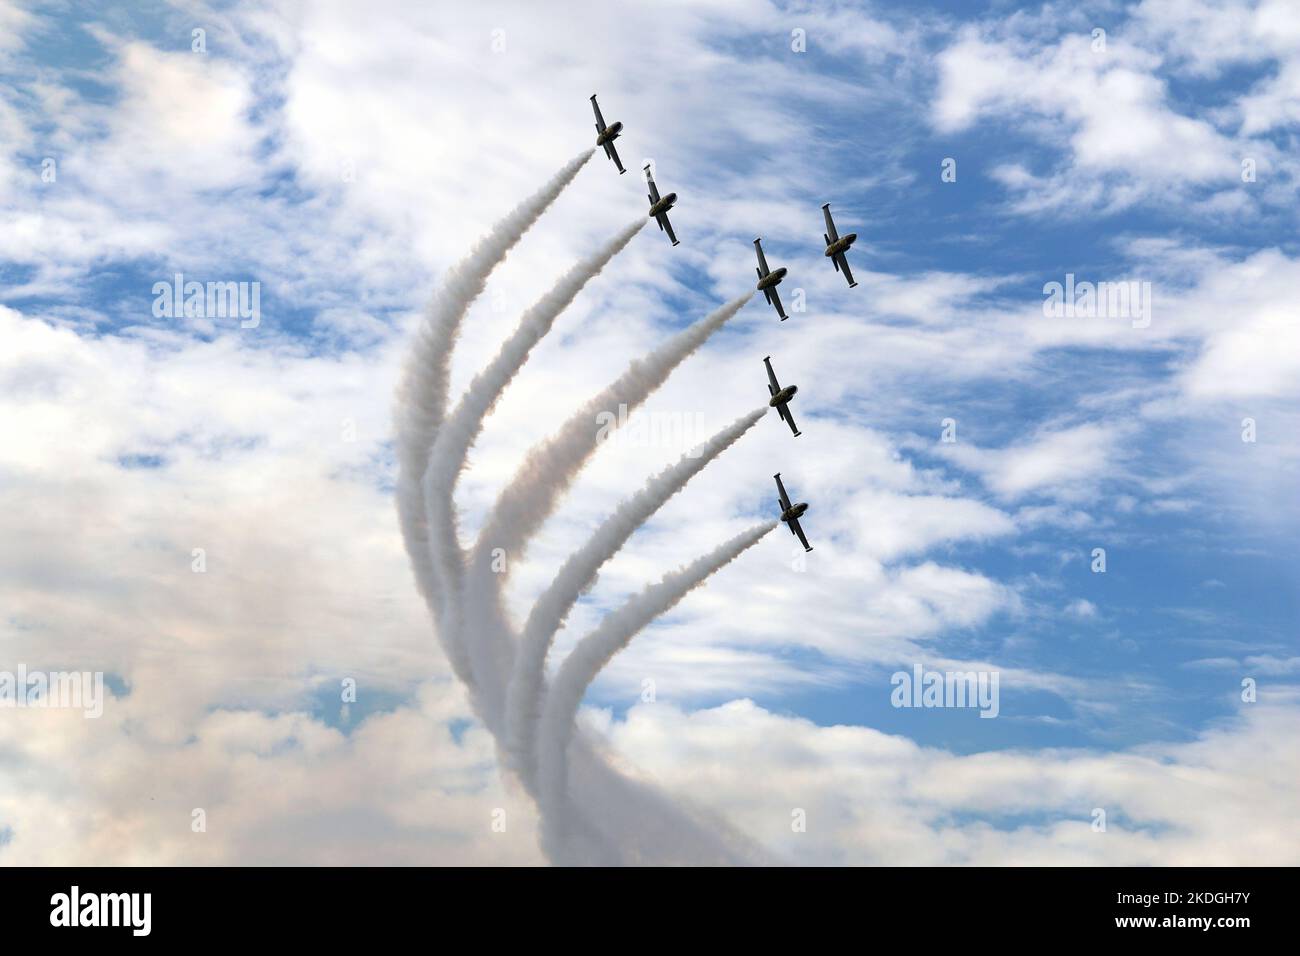 Kleine Brogel, Belgium - SEP 09, 2018: Breitling team formation flying with white smoke on an airshow at Kleine Brogel, Belgium. Stock Photo